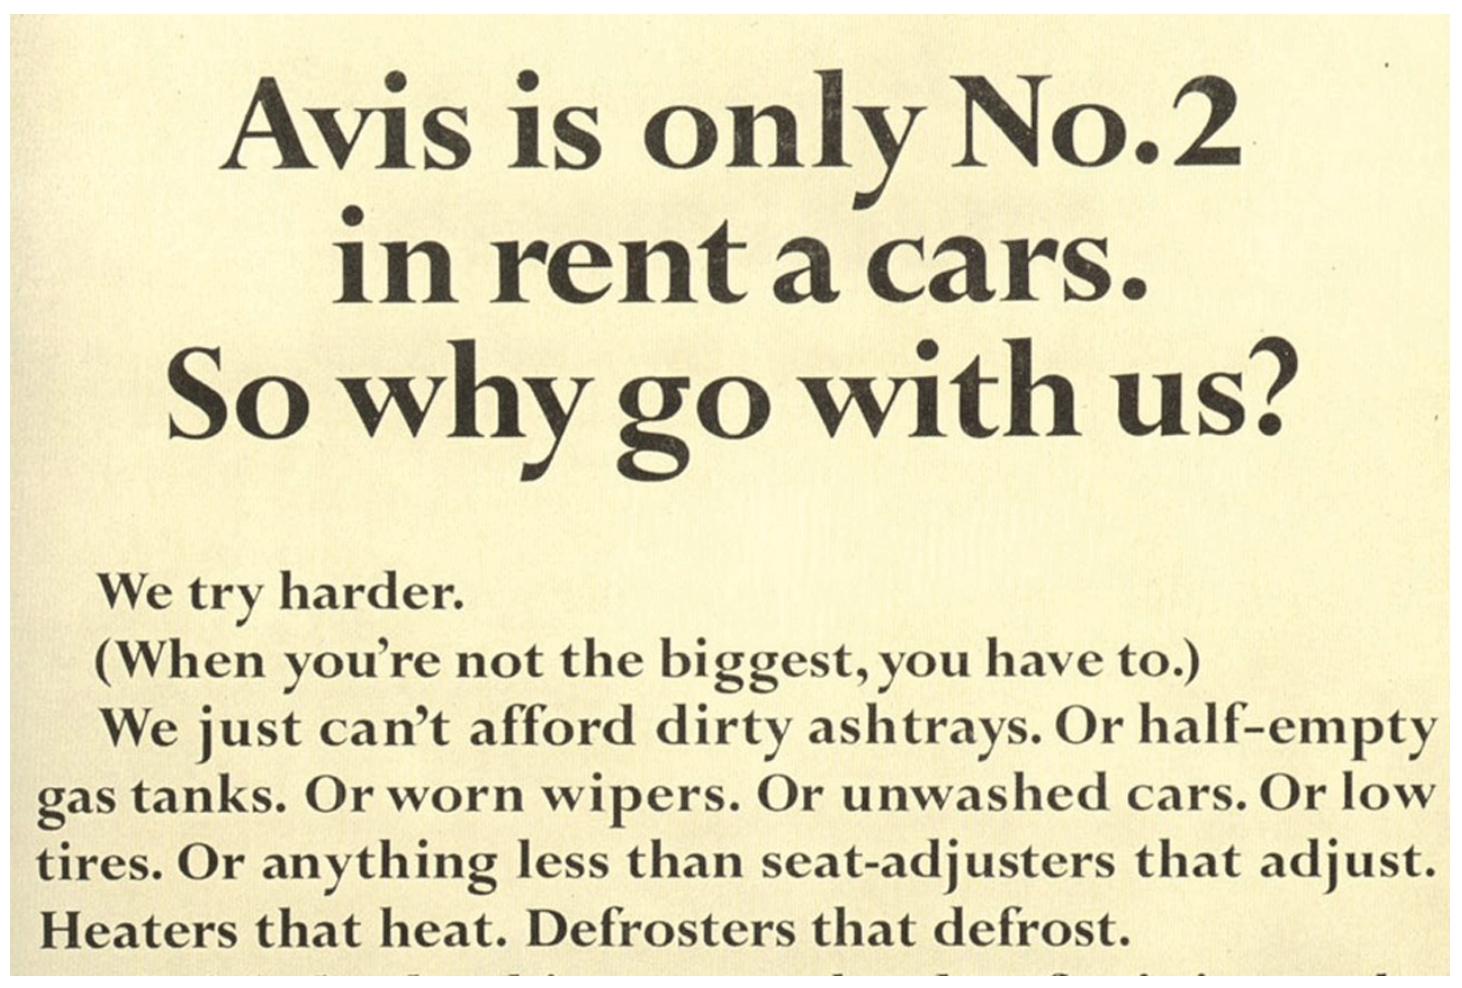 Avis is Number 2 Campaign